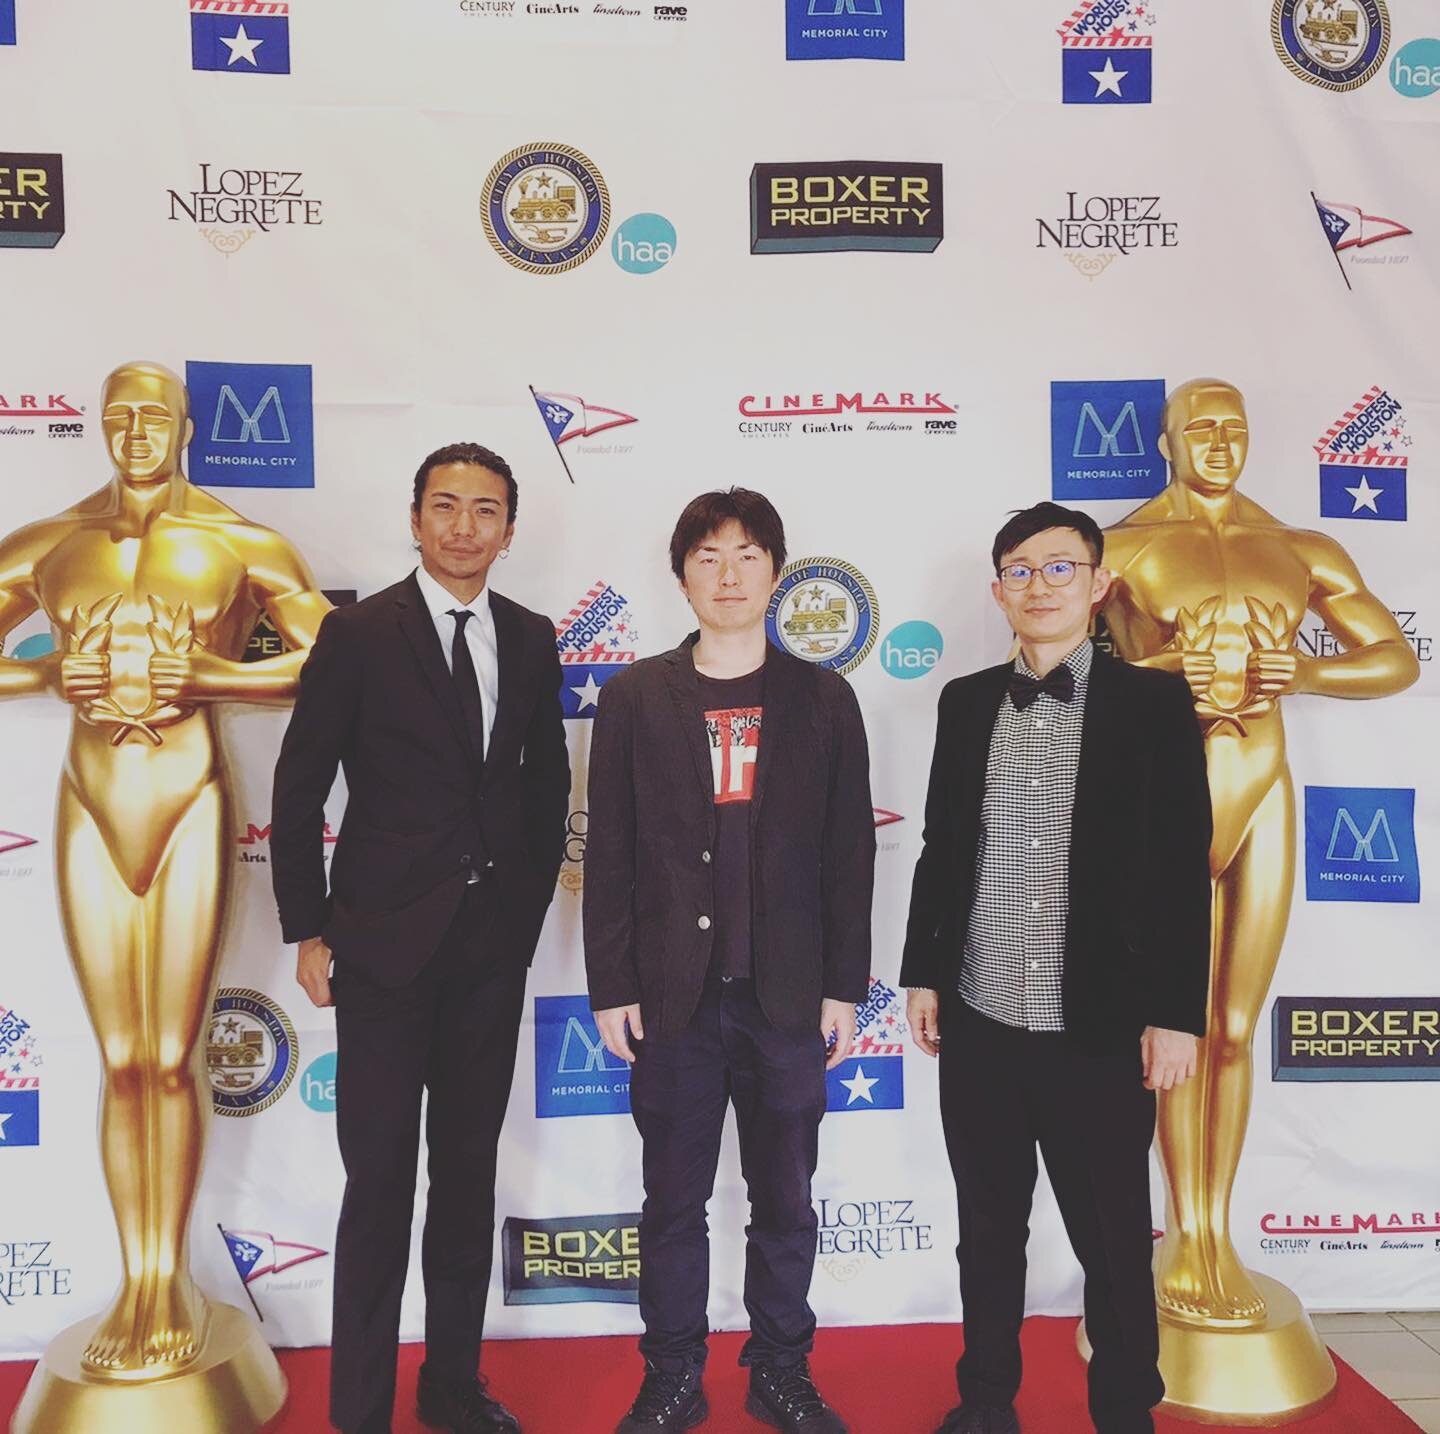 It took a while but last month I went to Houston to attend WorldFest-Houston International Film Festival which is one of the oldest film festival in North America. I composed music for a film &ldquo;About Anti- Natalism&rdquo; directed by Wataru Shib